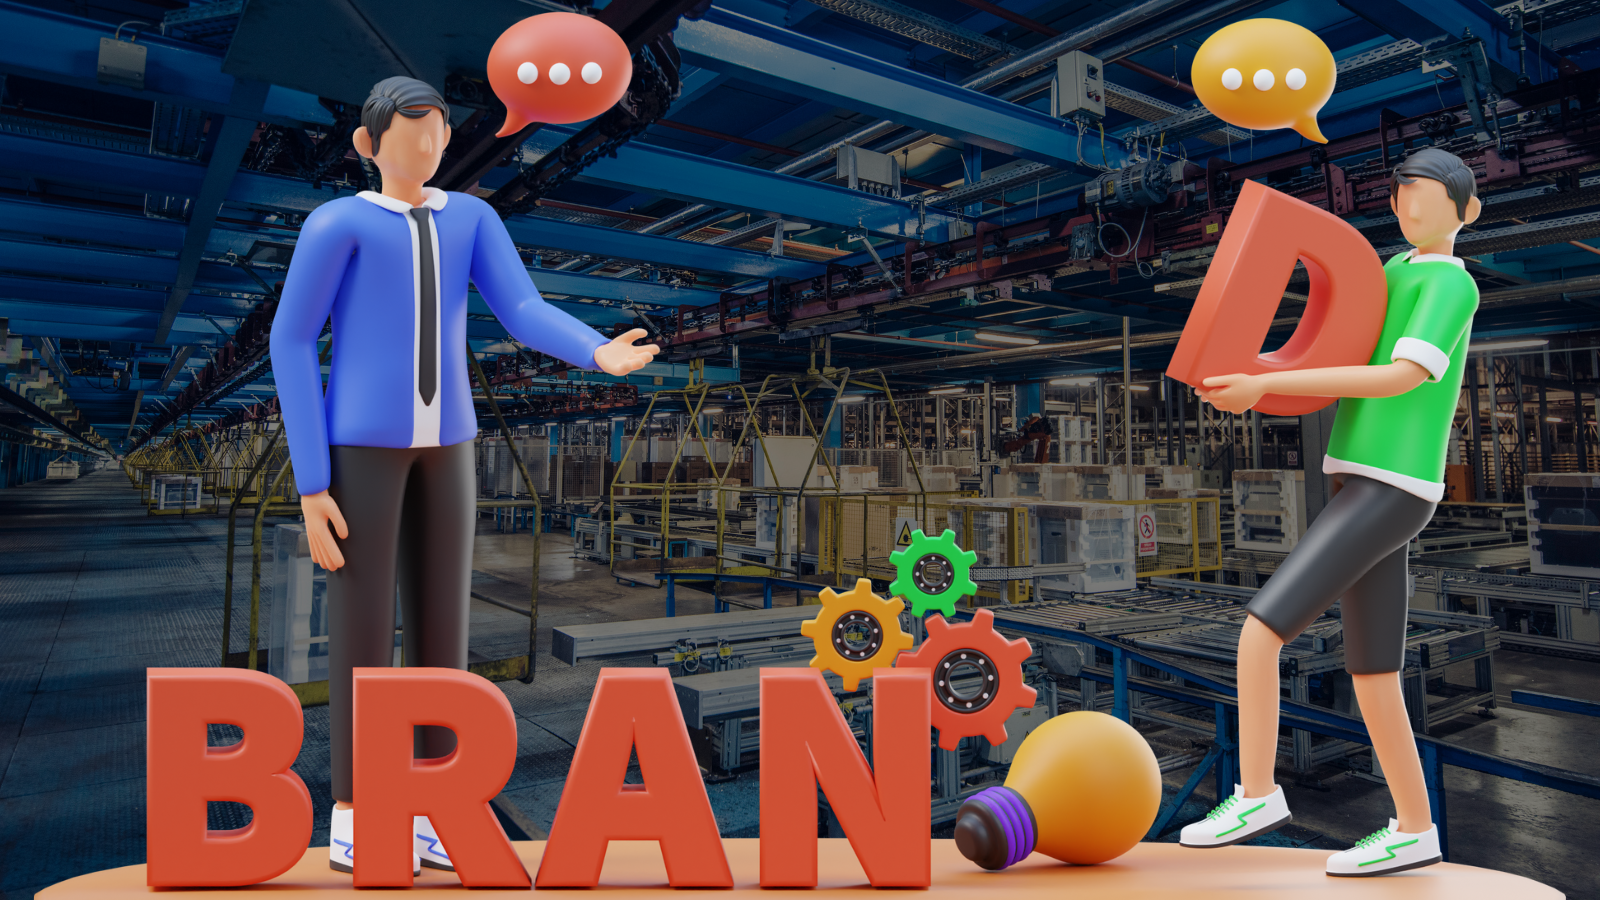 3d illustration of the word brand and people building it